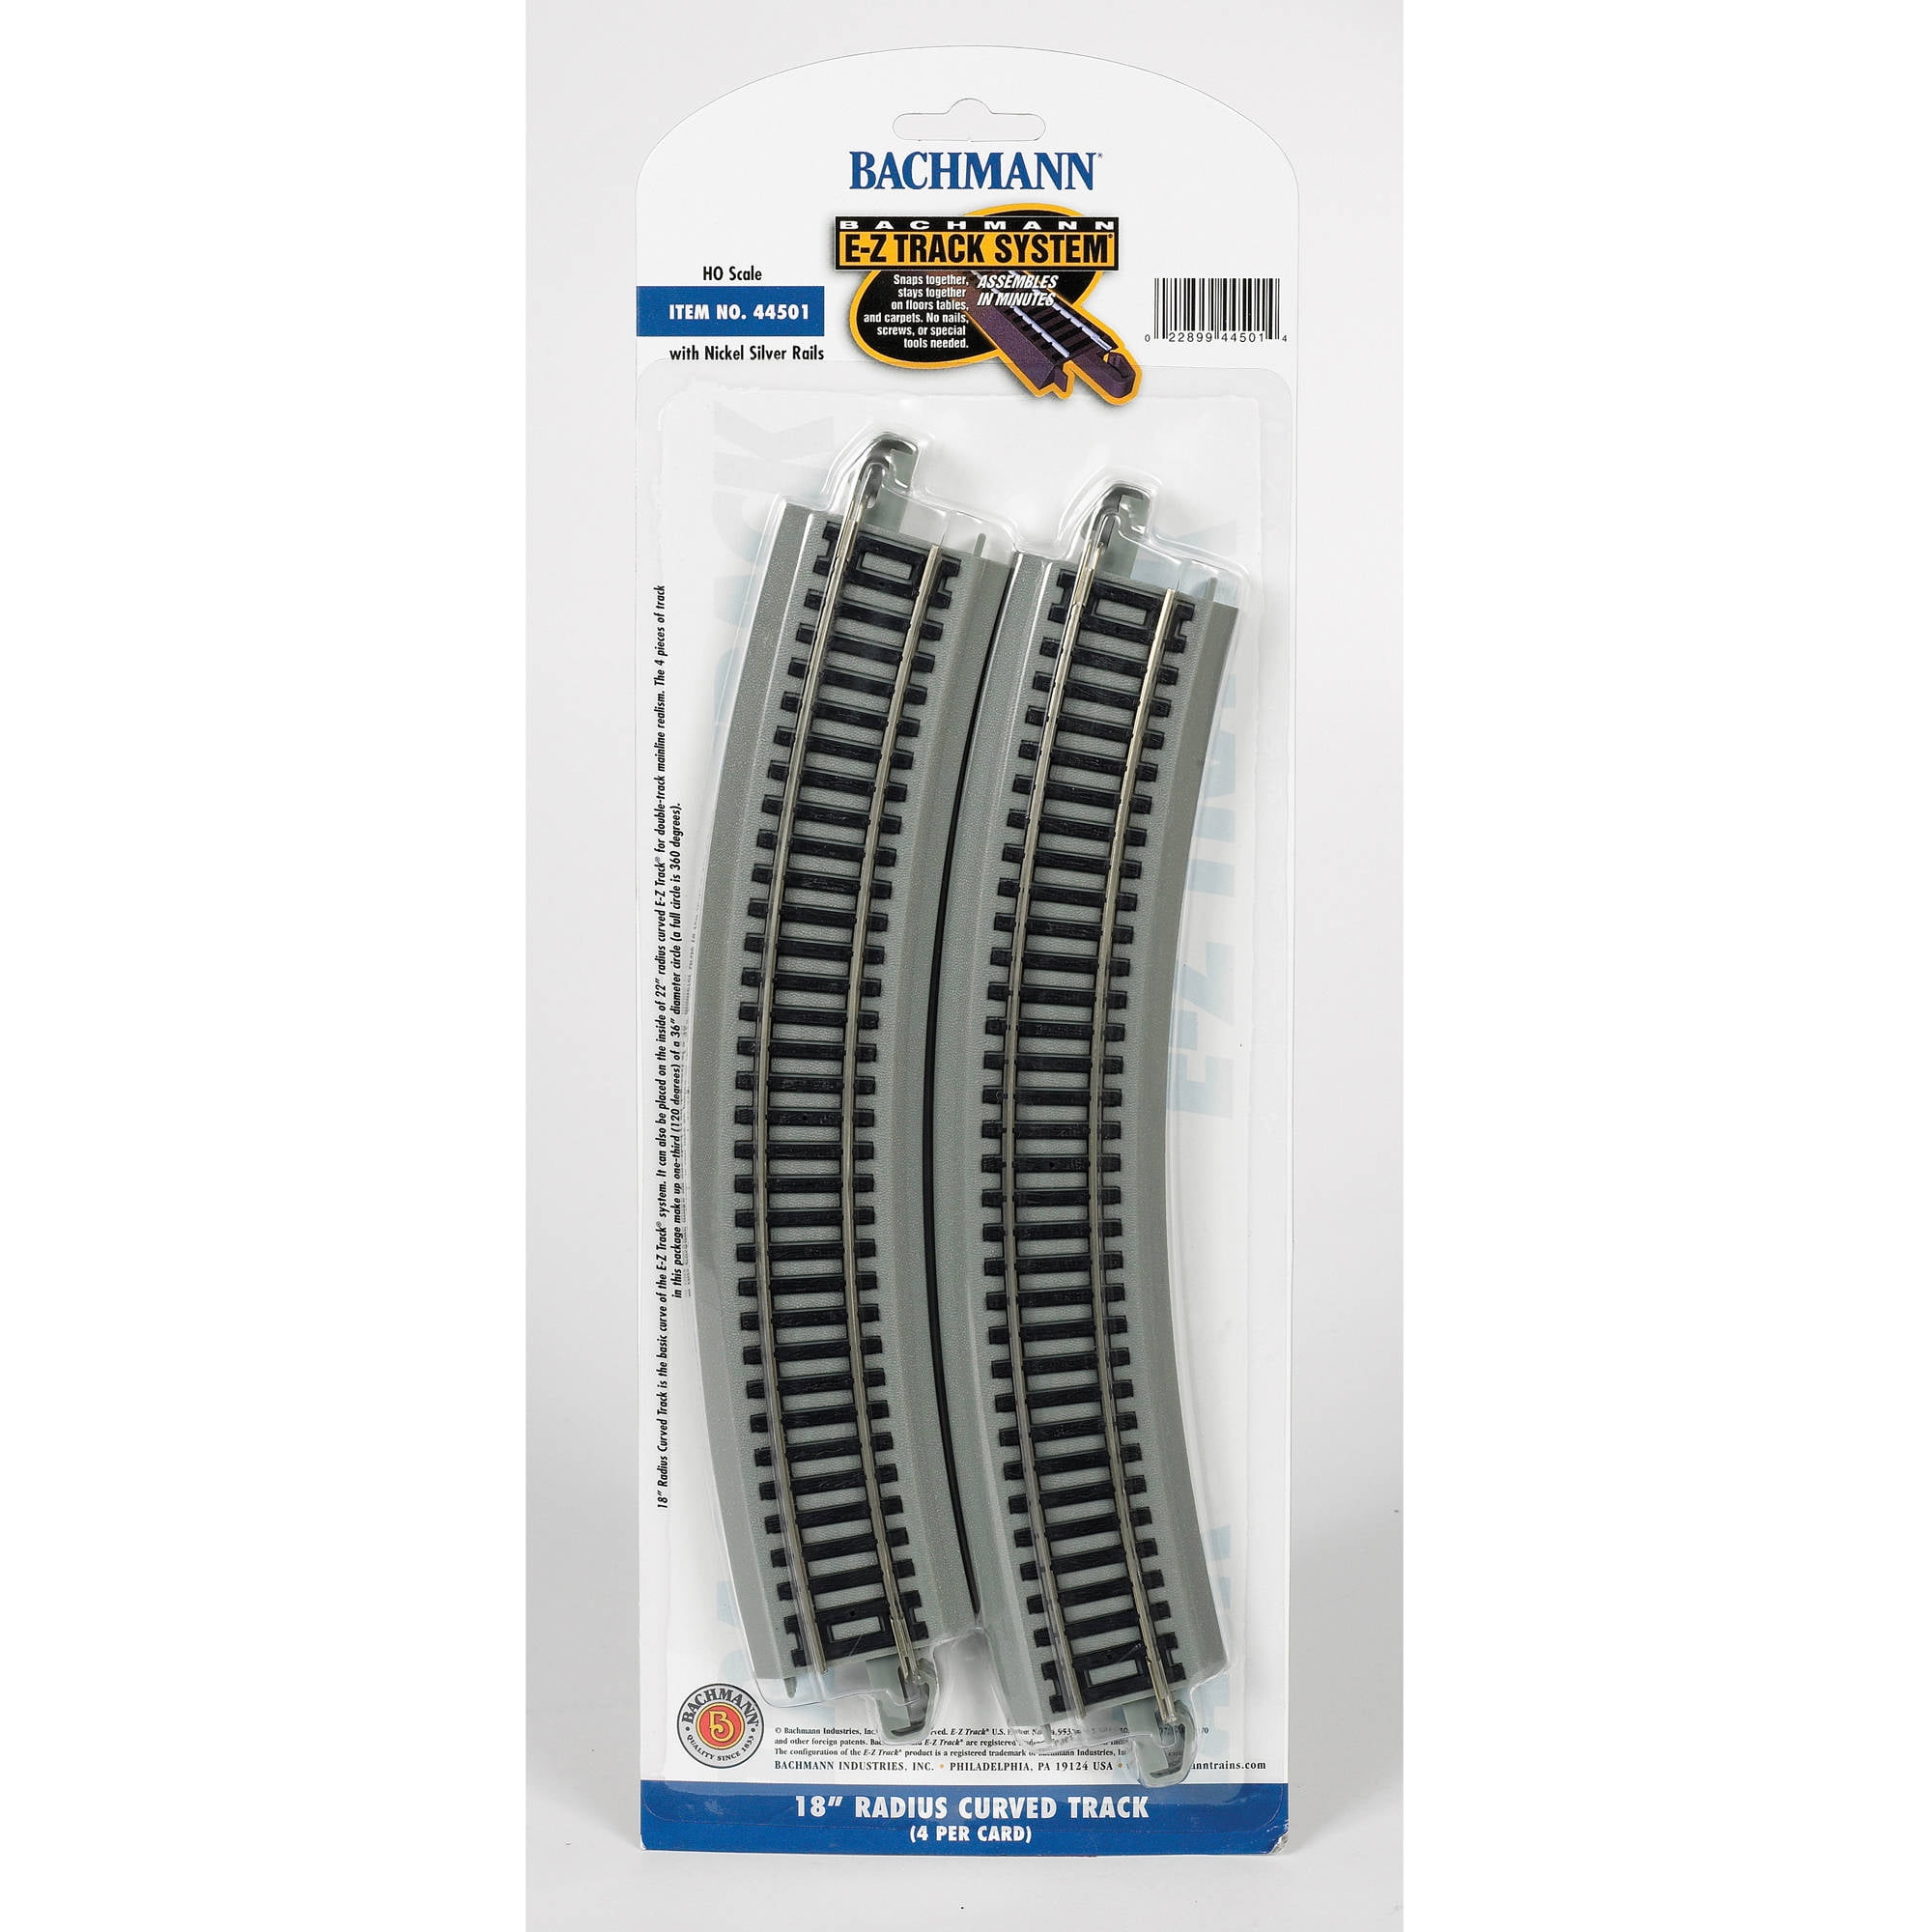 6-Pieces Nickel-Silver Details about   Bachmann BAC44801 N-Scale 11 1/4" Radius Curve E-Z Track 